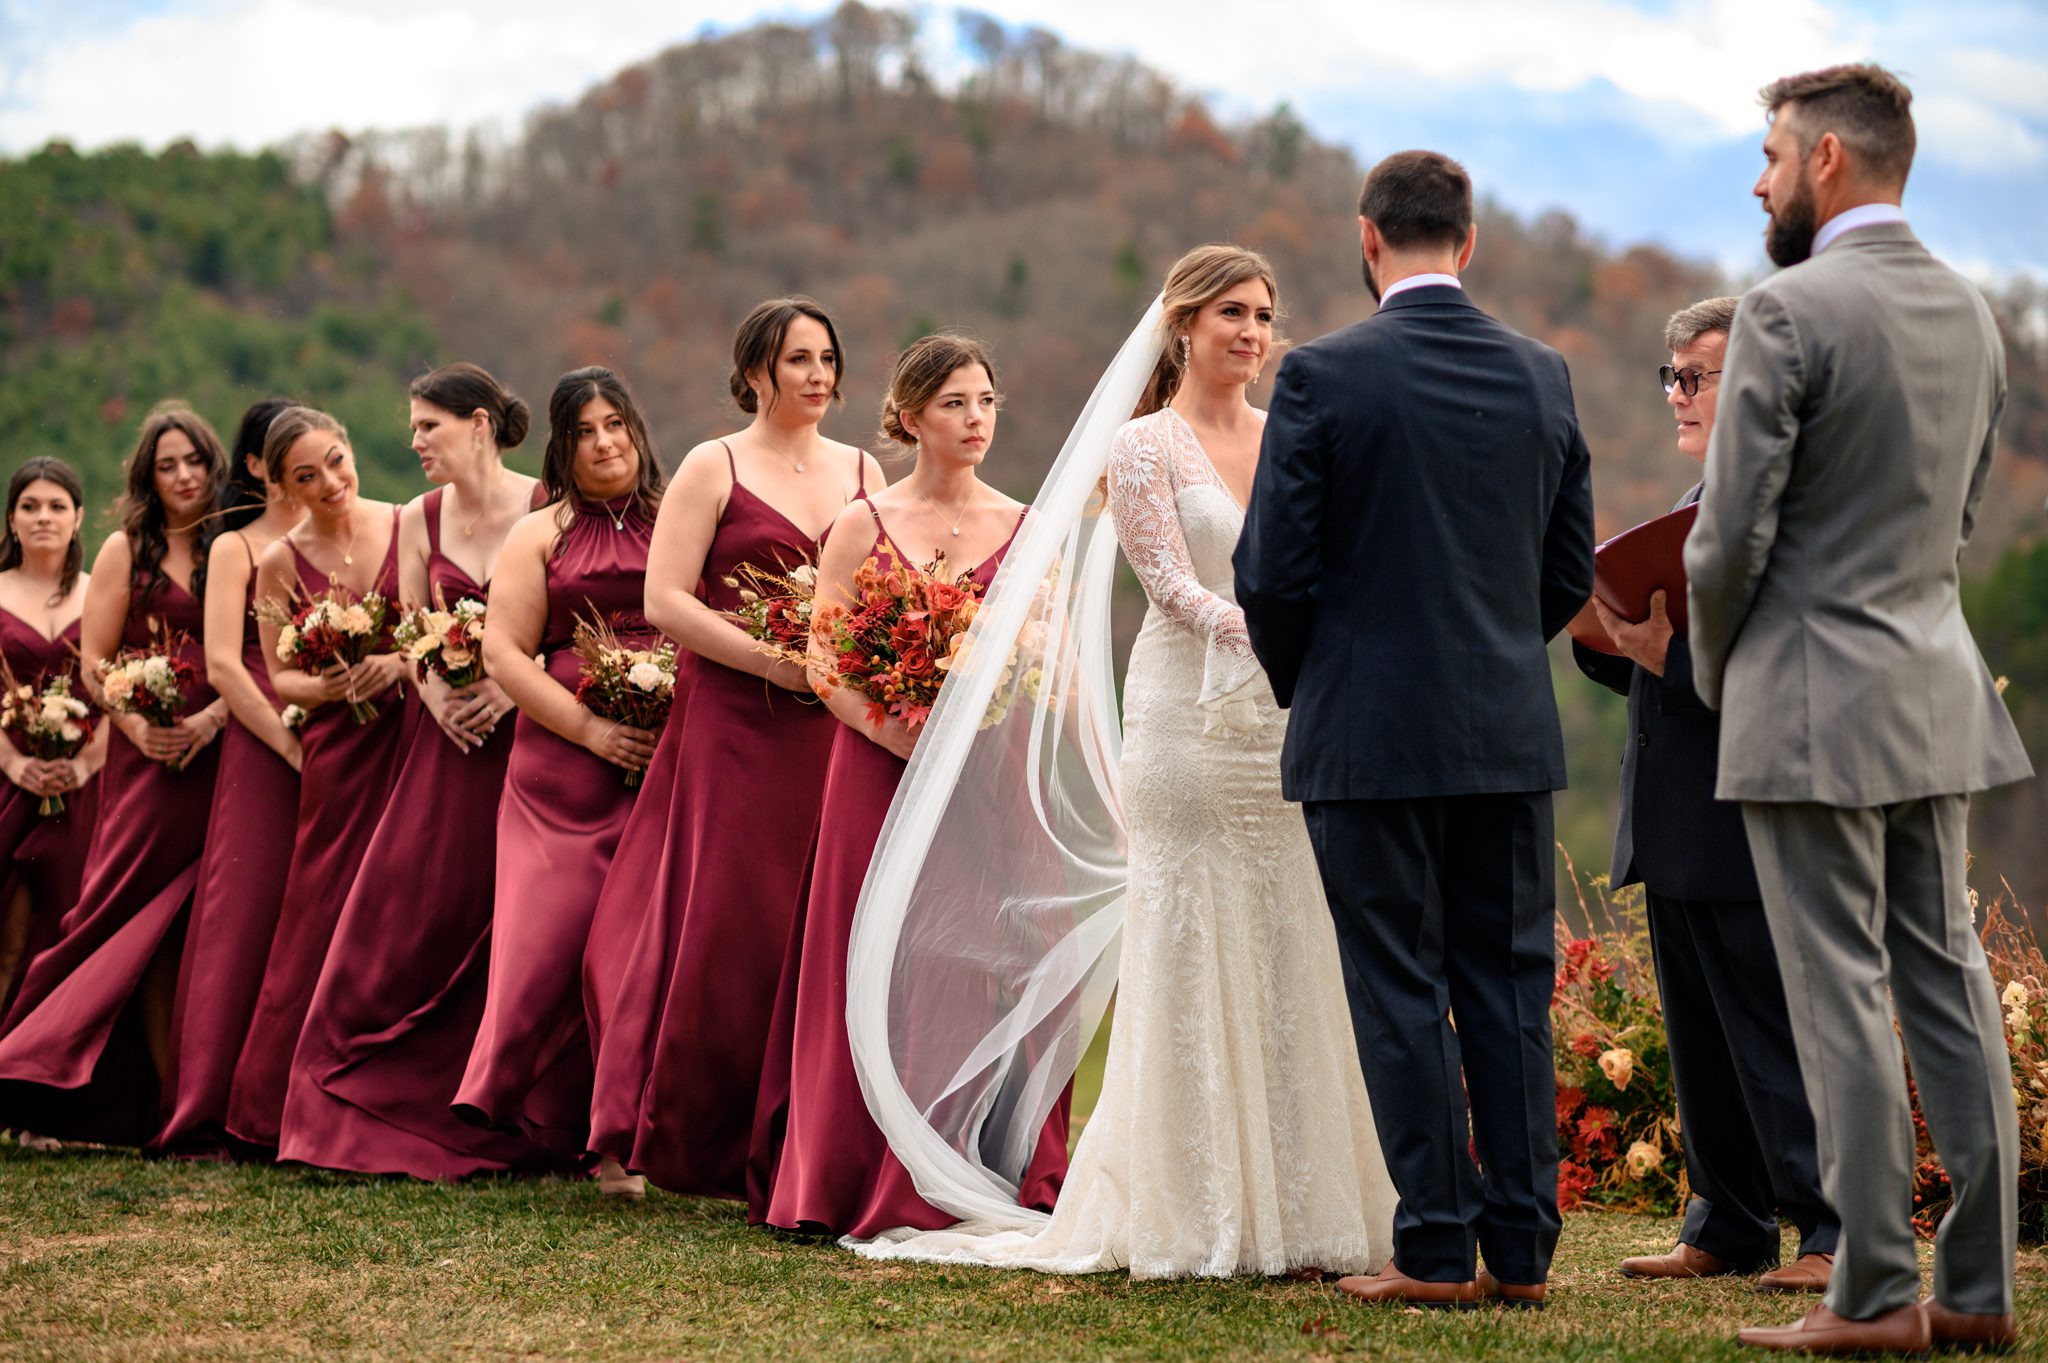 A wedding ceremony at The Ridge Asheville wedding venue with bridesmaids in burgundy dresses.